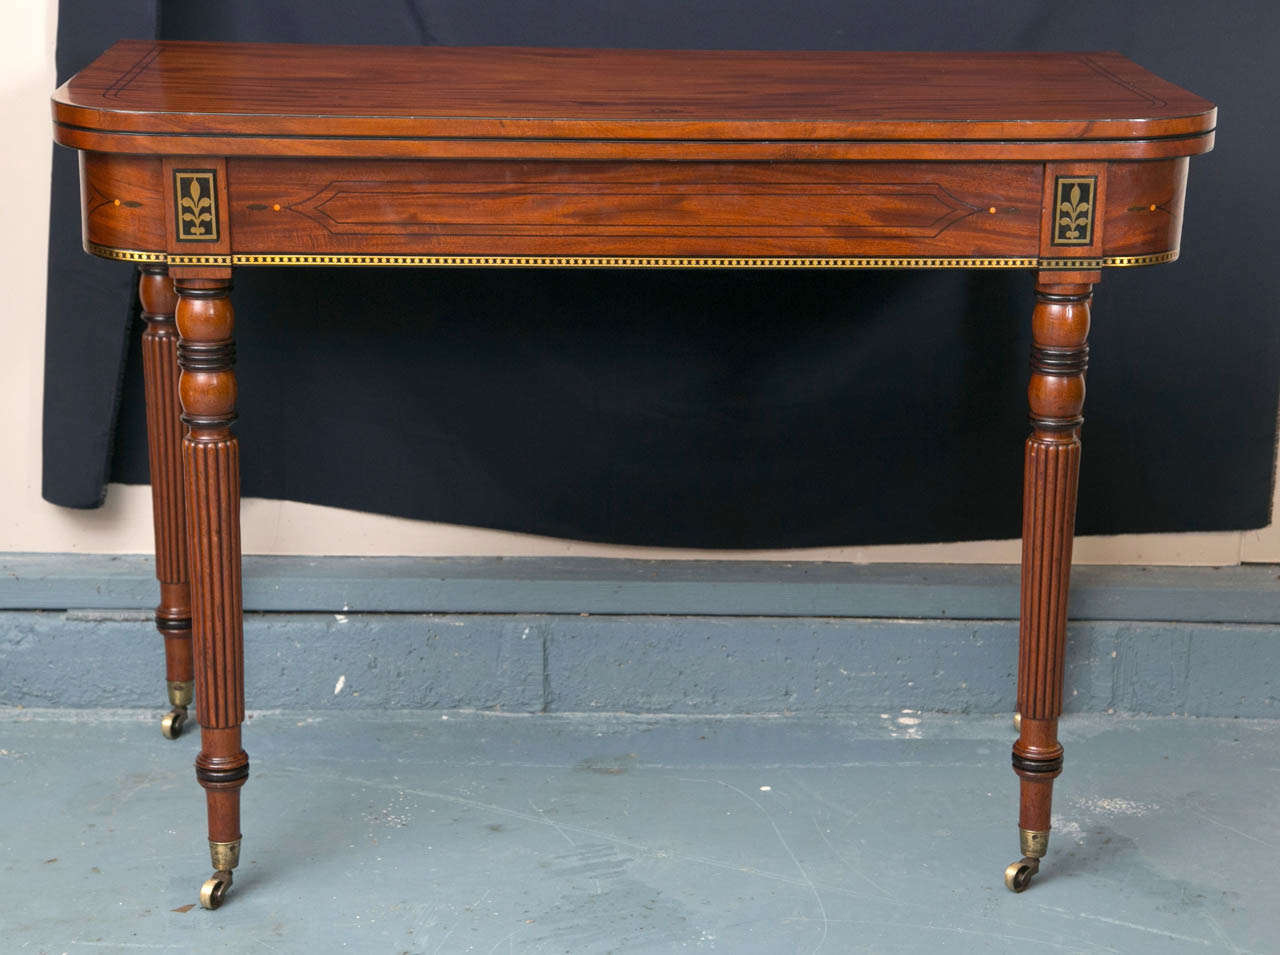 From the deeply whorled grain to the brass inlay and ebonized accents, this flip-top tea table epitomizes English Regency style. Both back legs swing to support the open top, which opens to a generous, near square 40” by 38”. One the finest tea